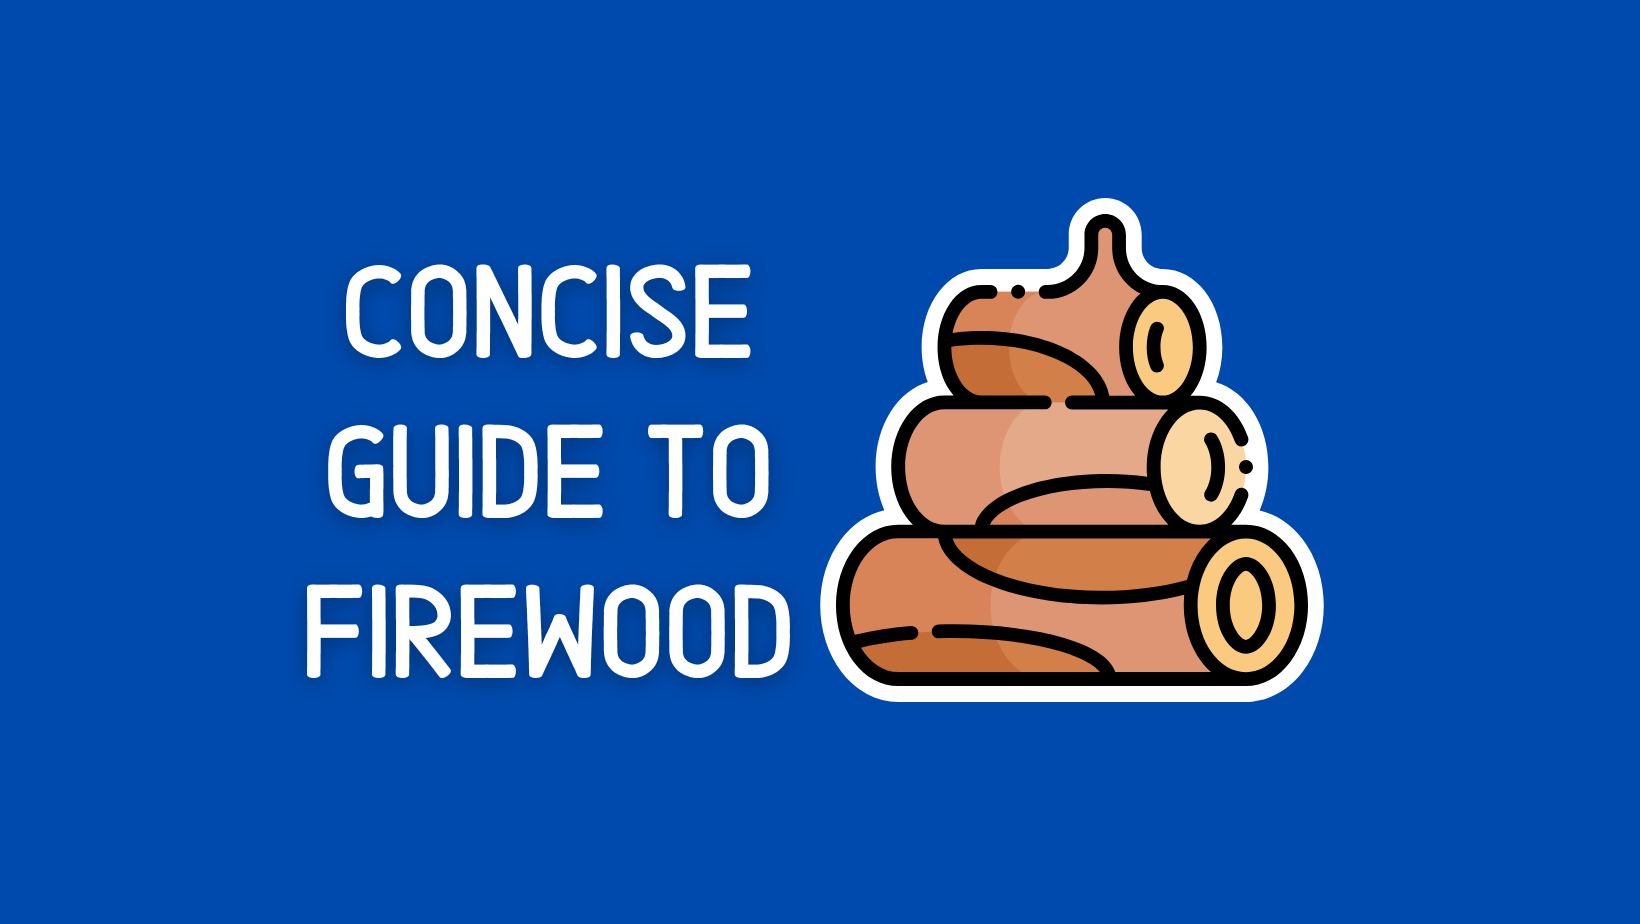 Concise Guide to Firewood